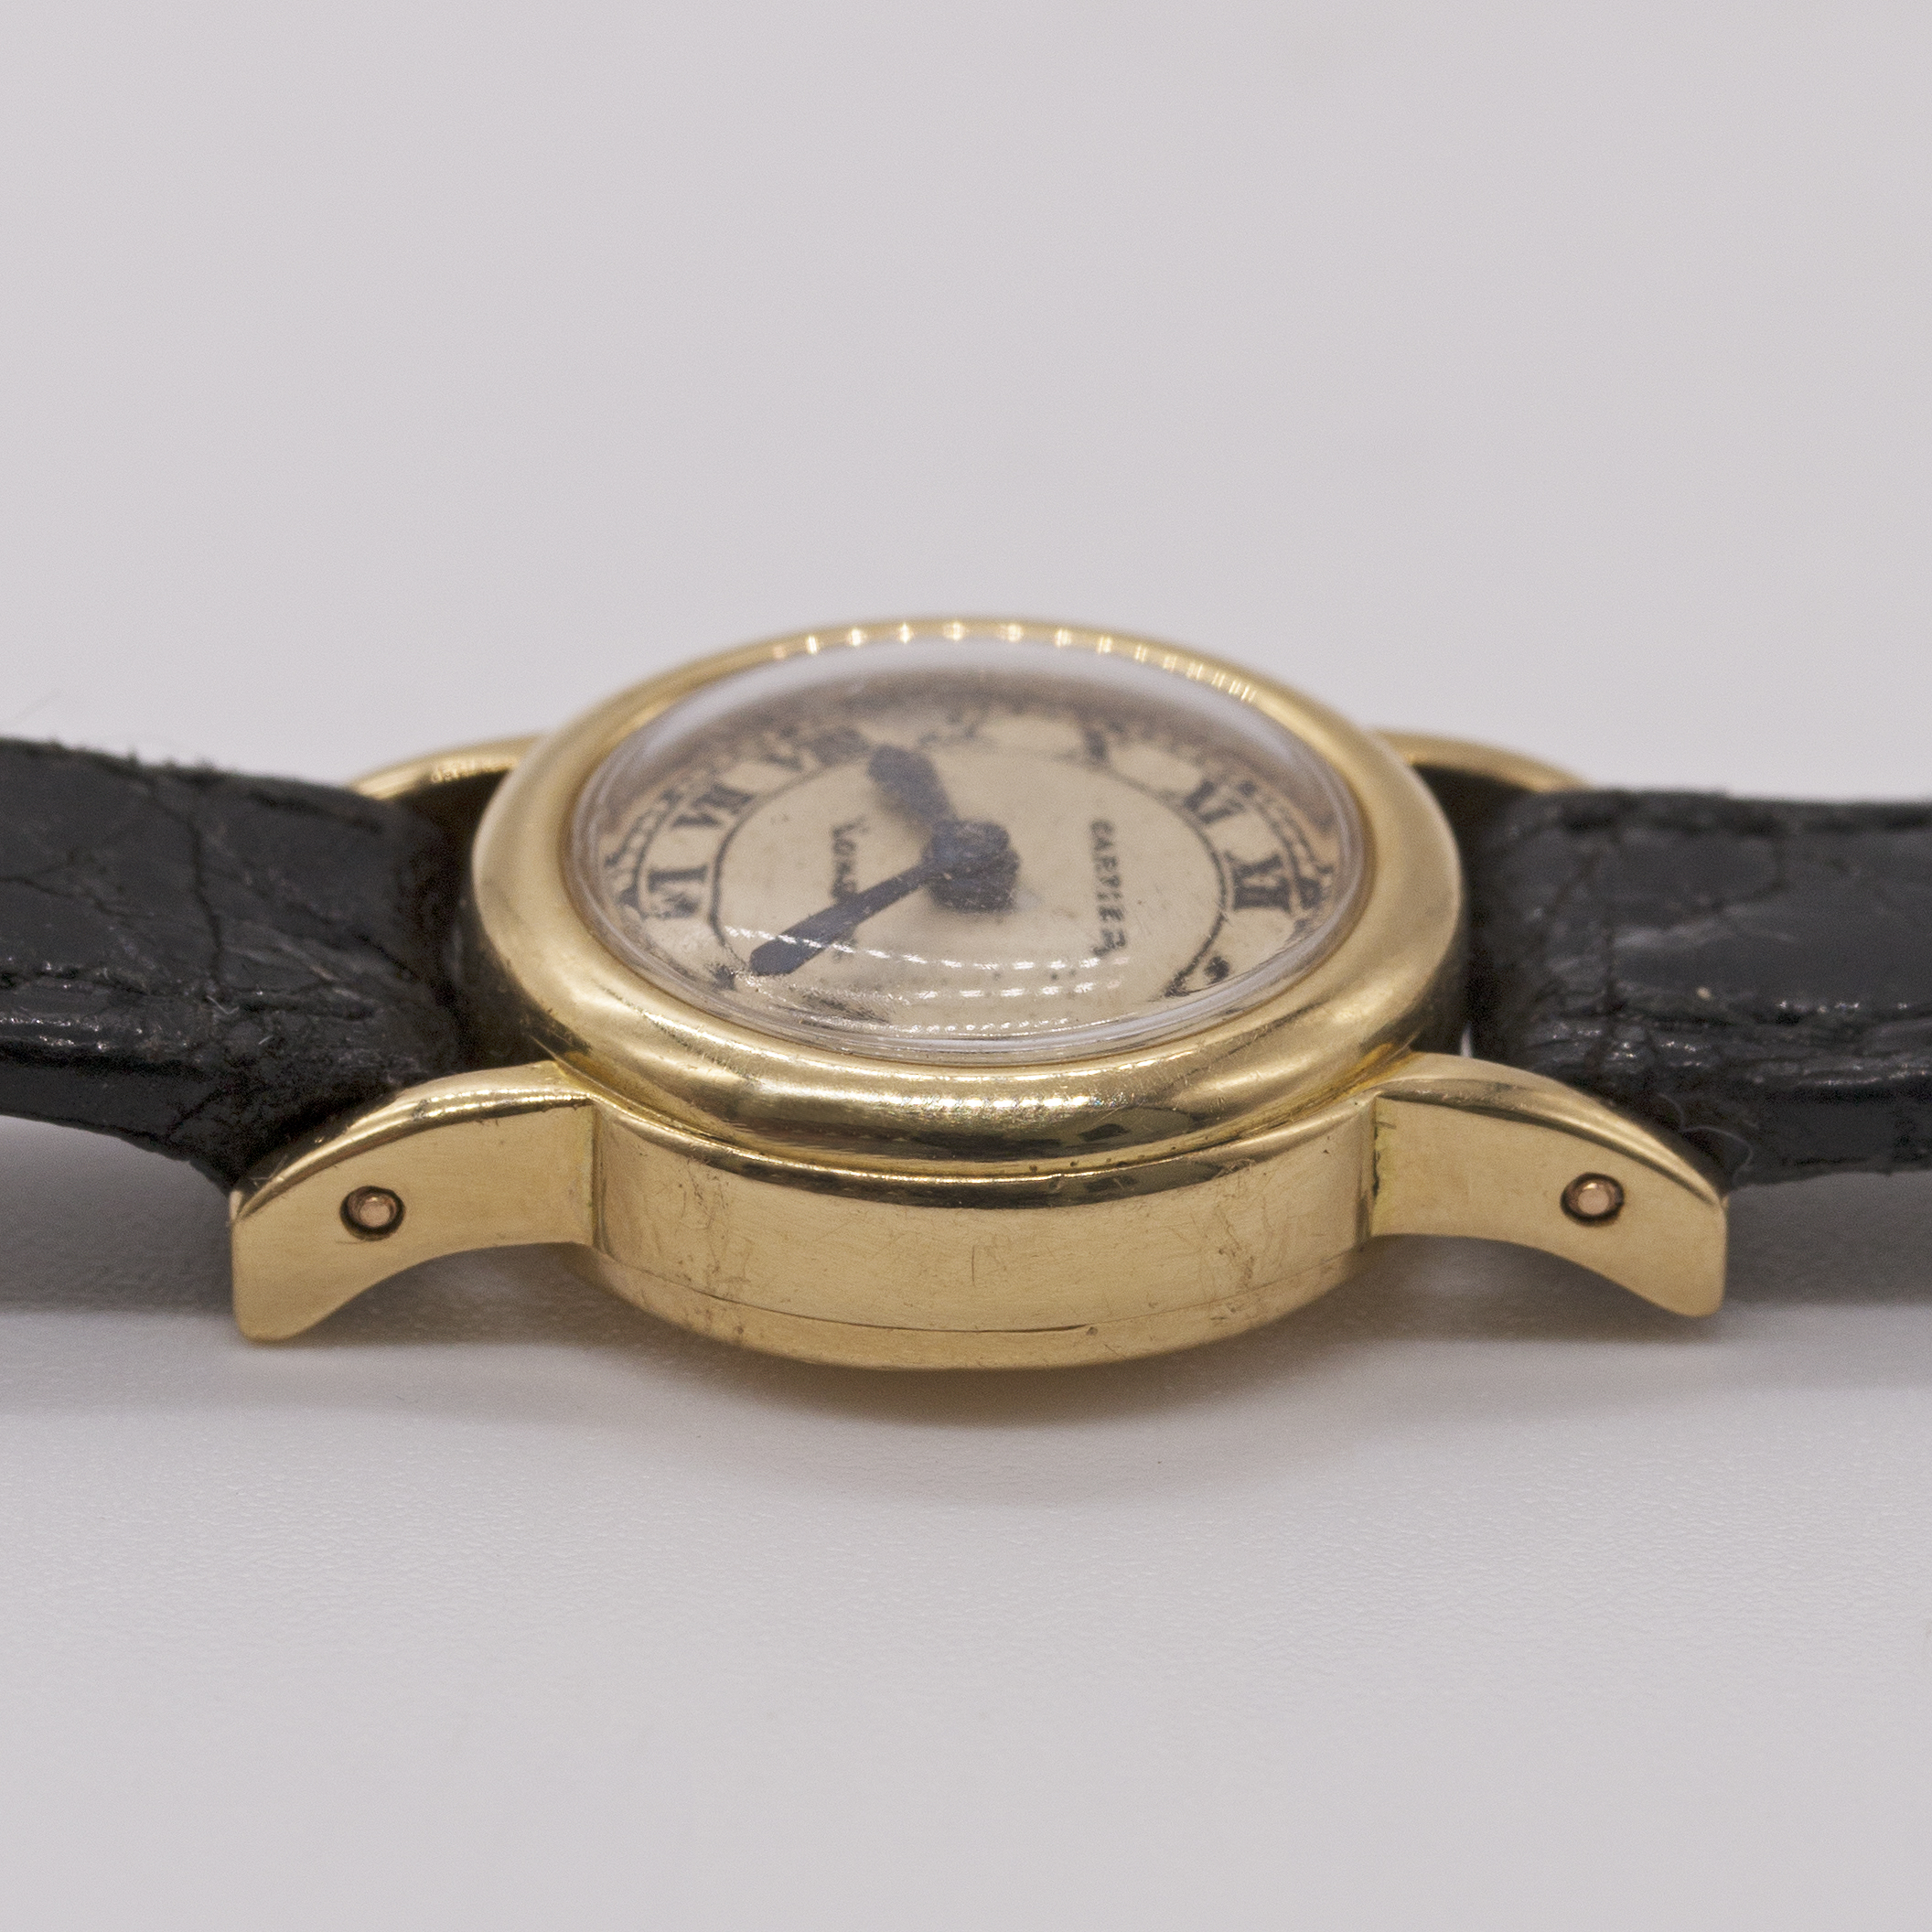 A RARE LADIES 18K SOLID GOLD CARTIER LONDON BACKWIND WRIST WATCH CIRCA 1961, WITH LONDON HALLMARKS - Image 8 of 8